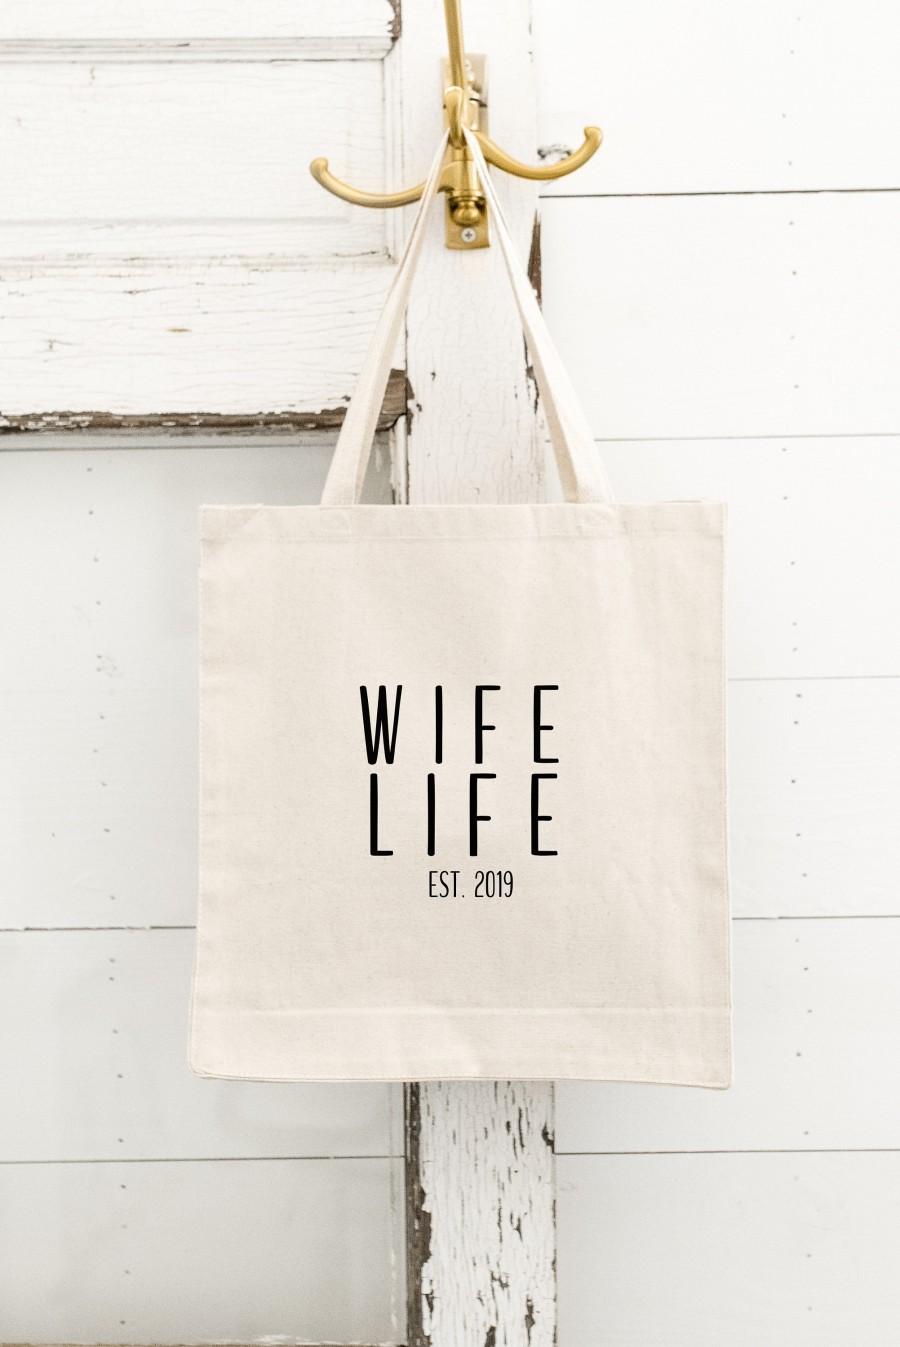 Wedding - Wife Life Tote - Honeymoon Tote - Bride Gift - Wedding Tote - Bachelorette Party Tote - Personalized Tote - Mrs. Tote- Wife Life